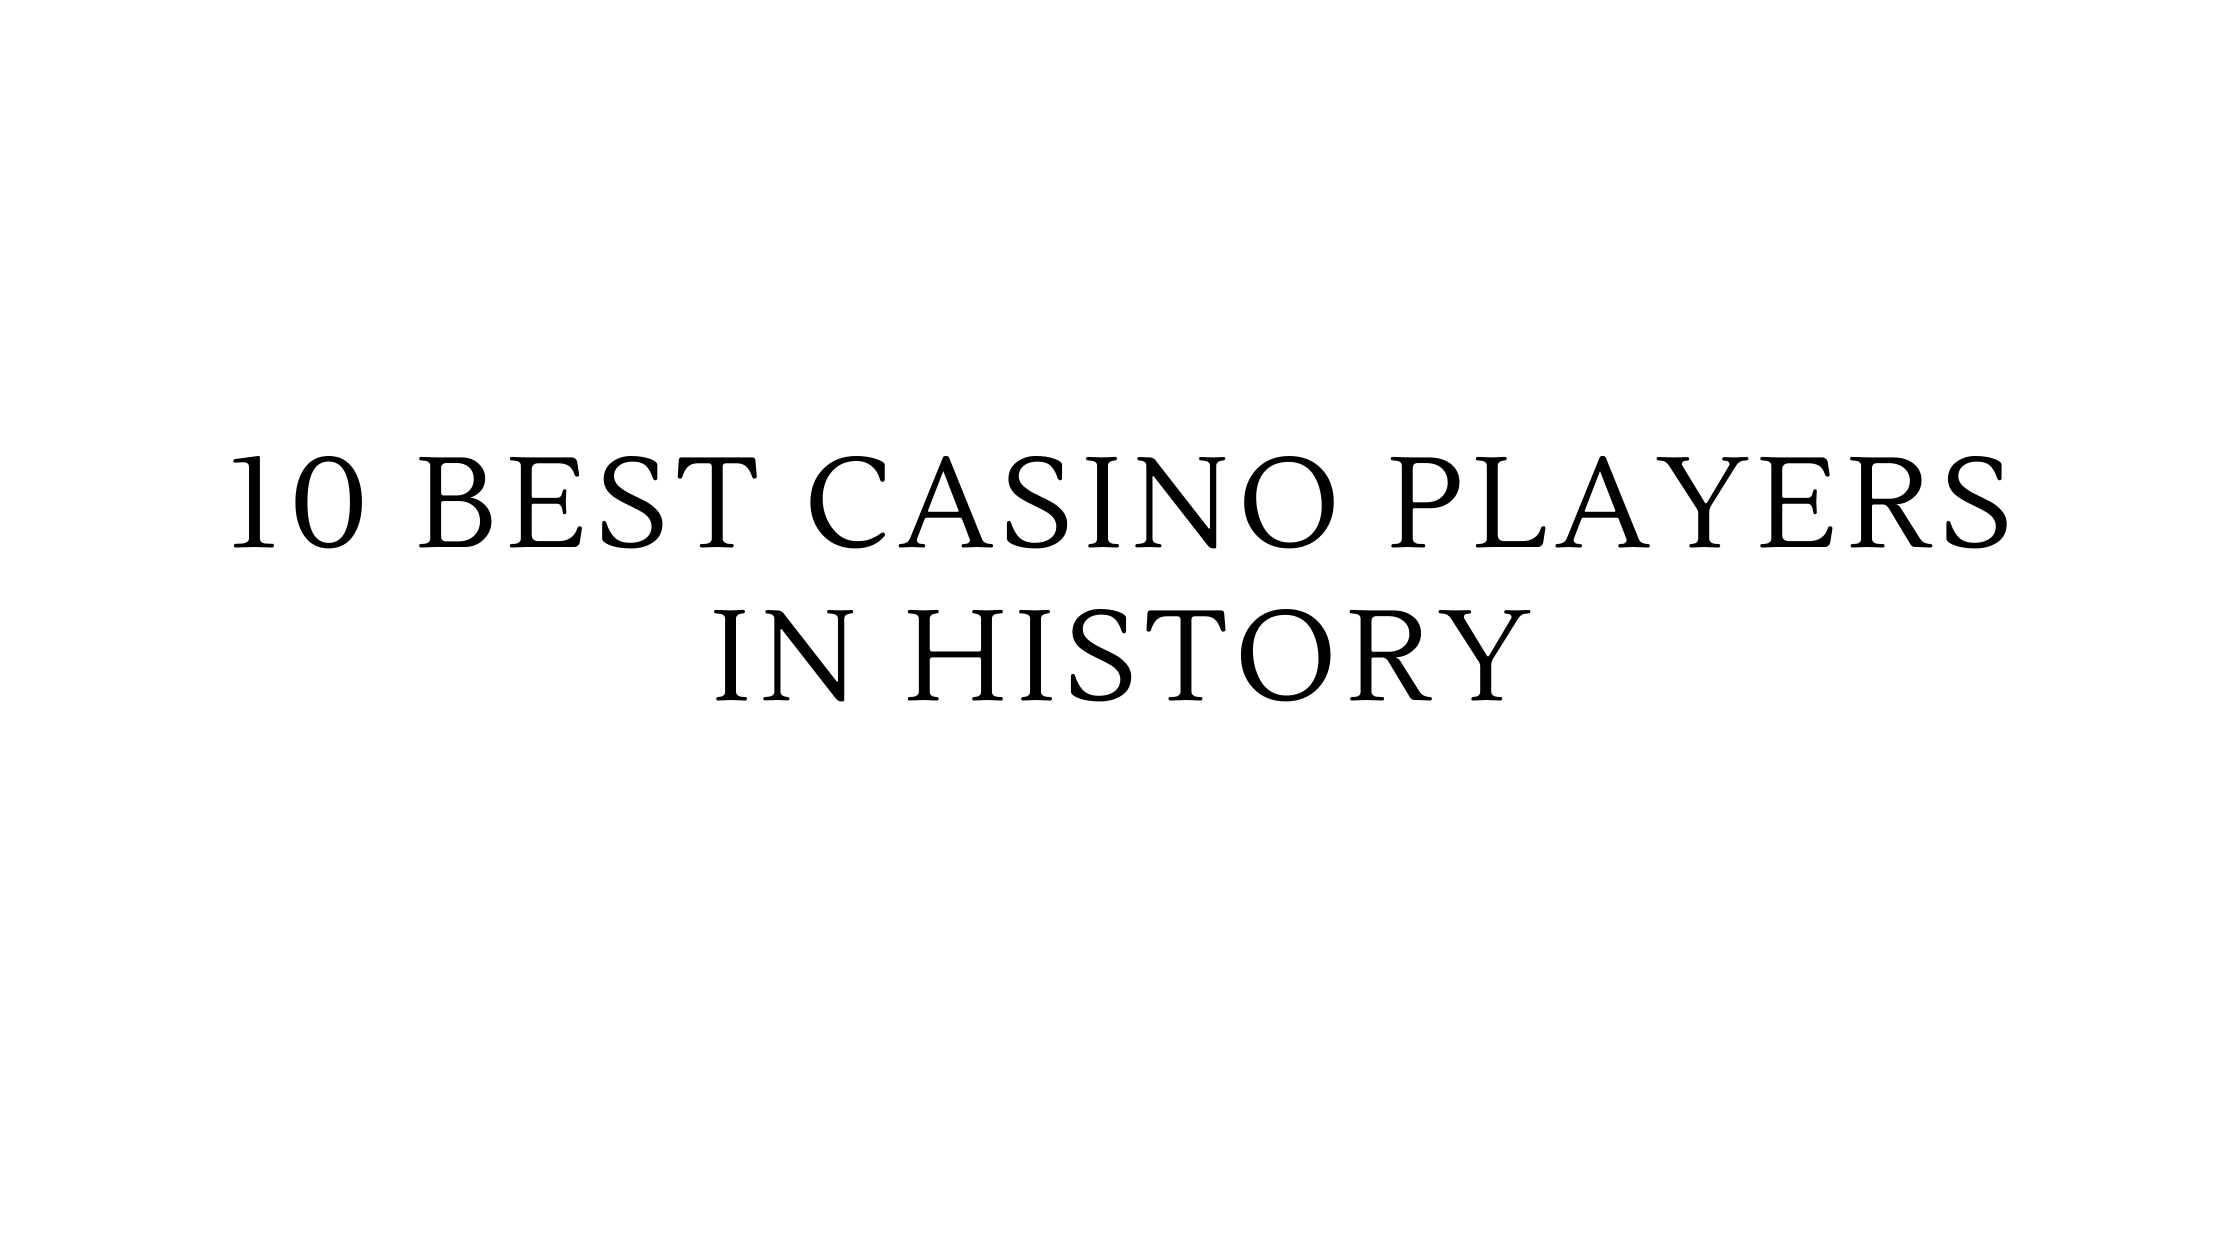 10 Best Casino Players in History